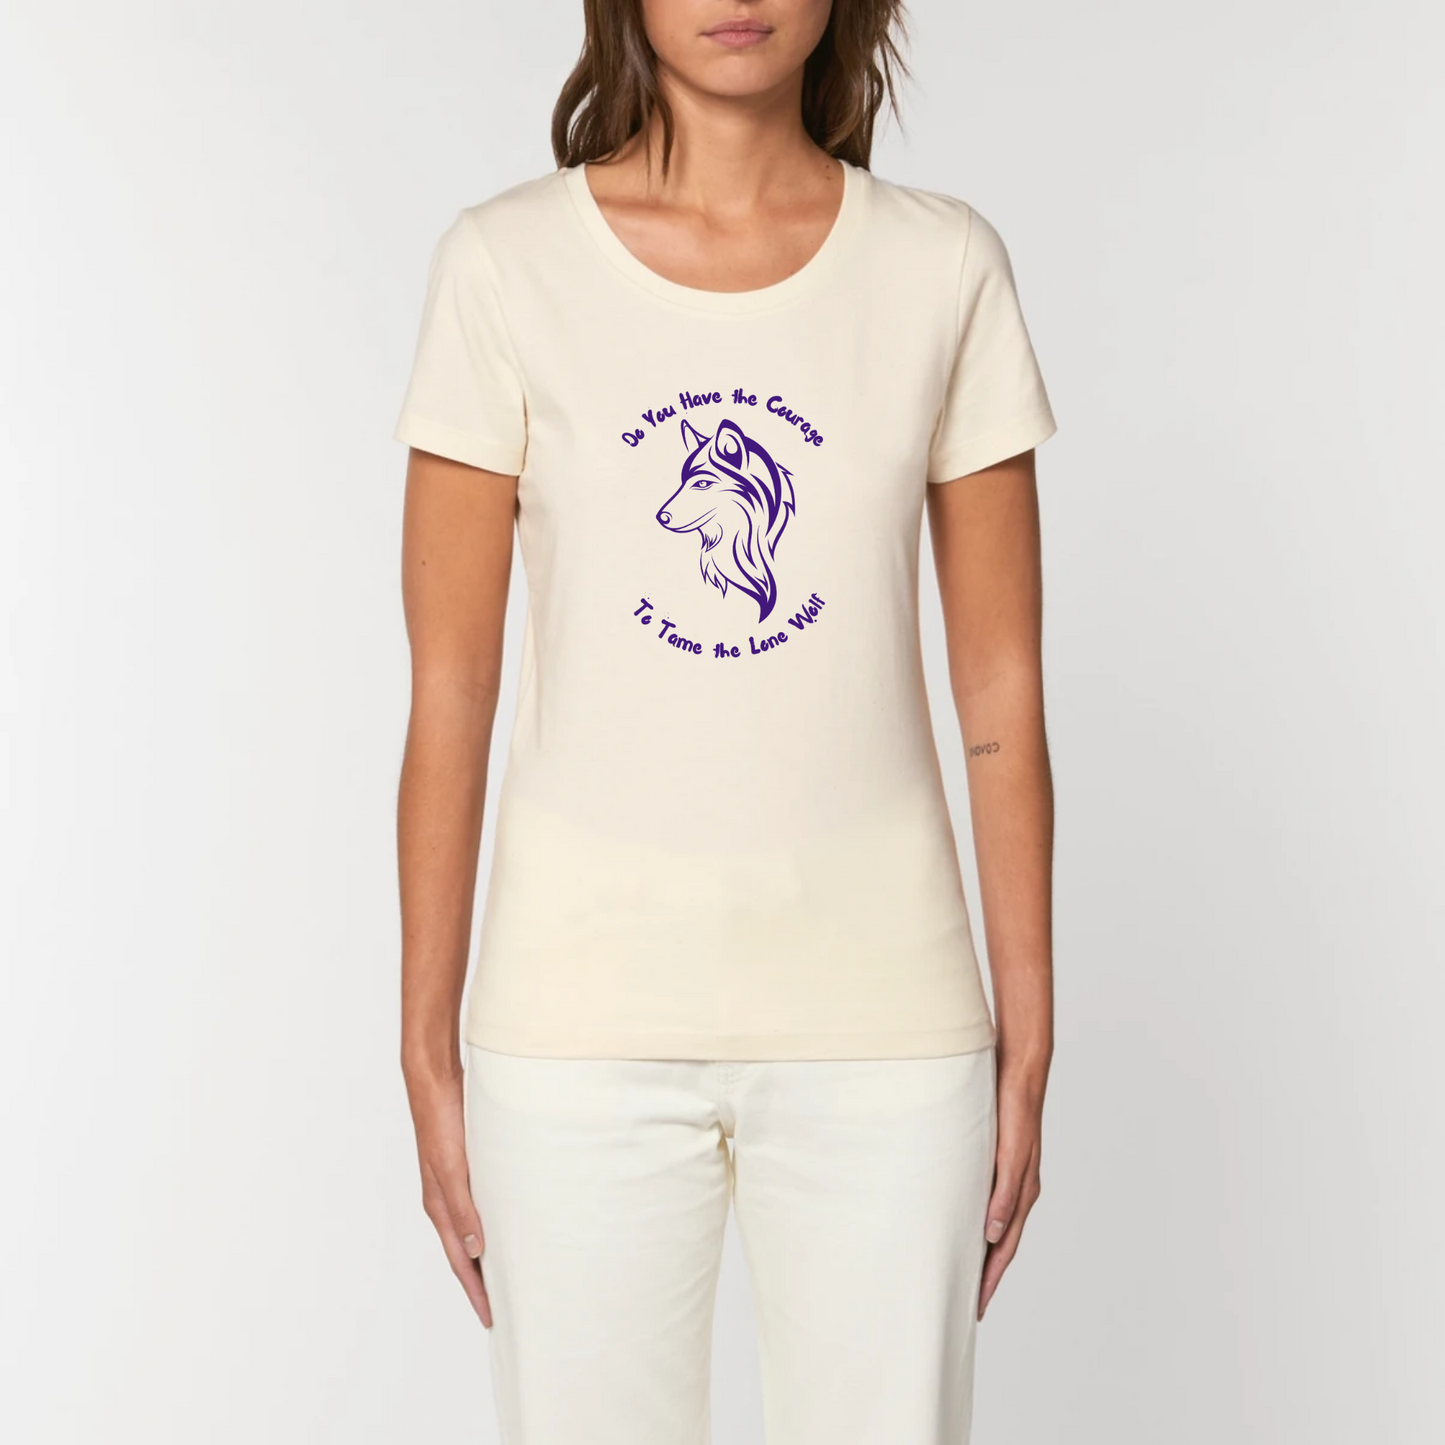 Graphic design t-shirt for women which features a feminine wolf head with wording above and below the wolf head saying Do You Have the Courage to Tame the Lone Wolf. The t-shirt is white